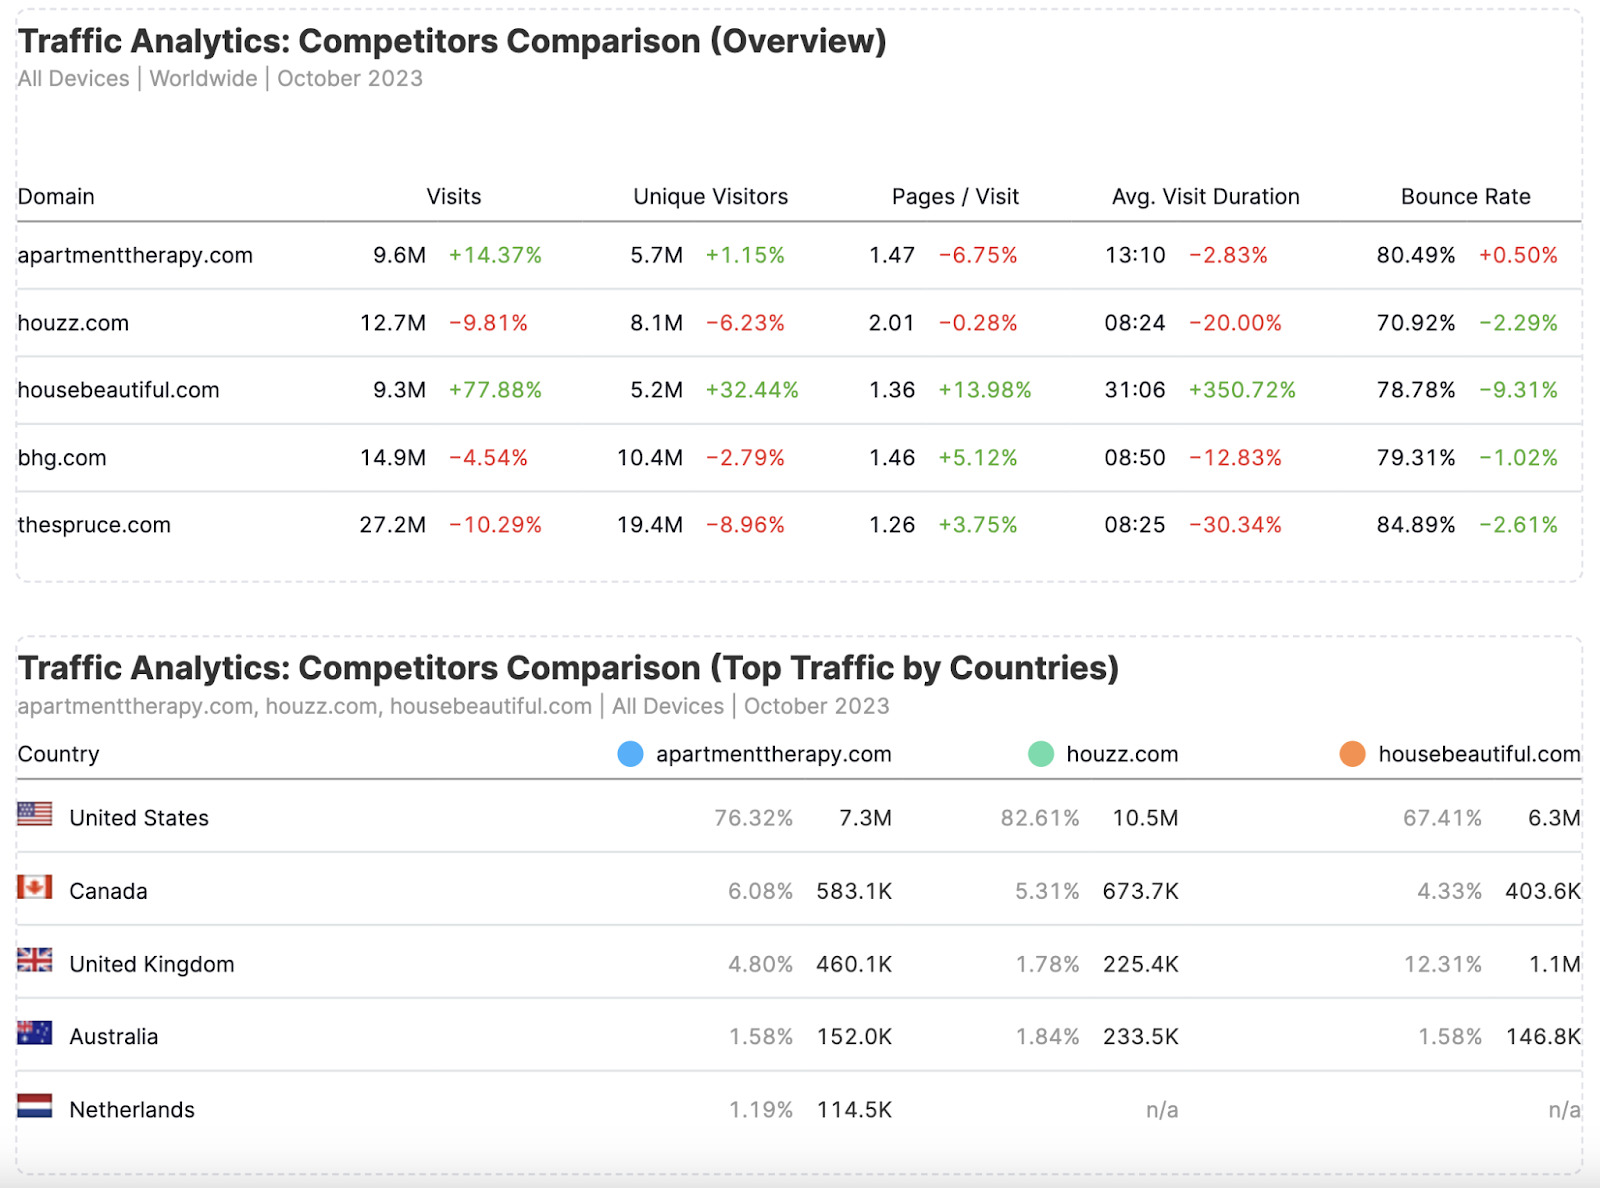 "Traffic Analytics: Competitors Comparison (Overview and Top Traffic by Countries)" sections of the report with new competitors added